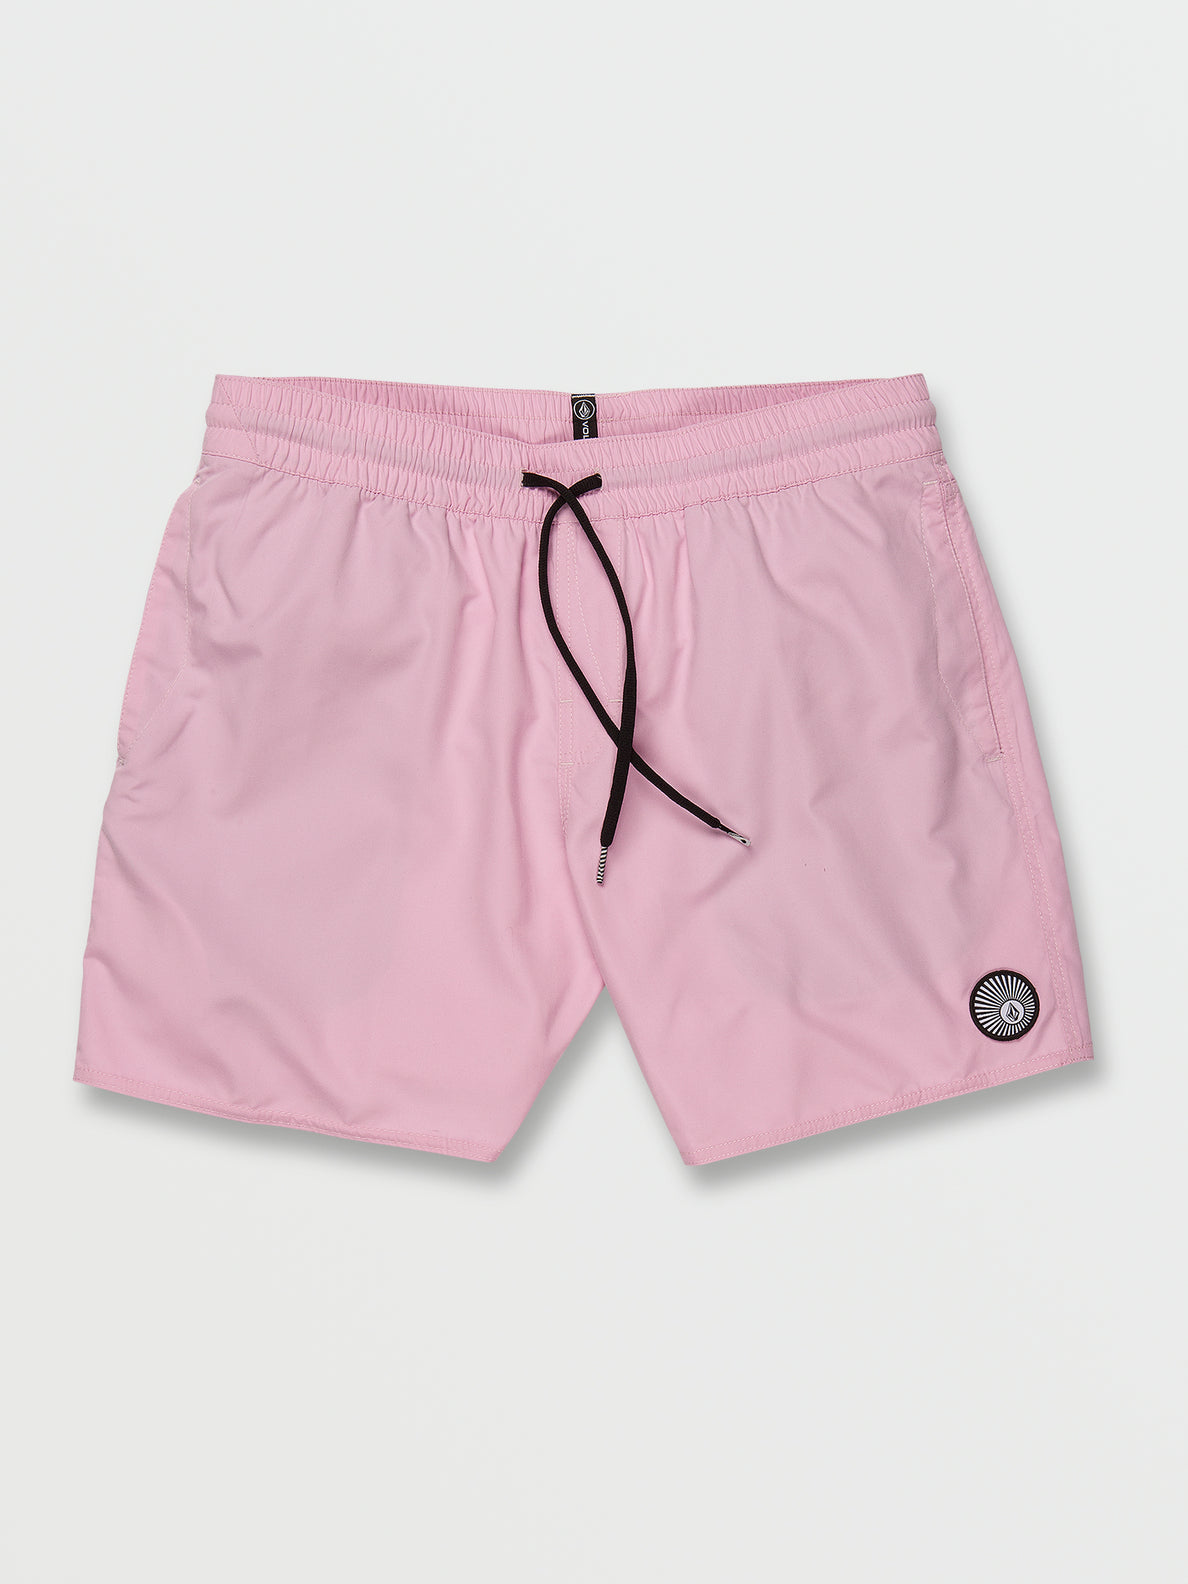 Lido Solid Trunks - Reef Pink (A2512306_RFP) [F]